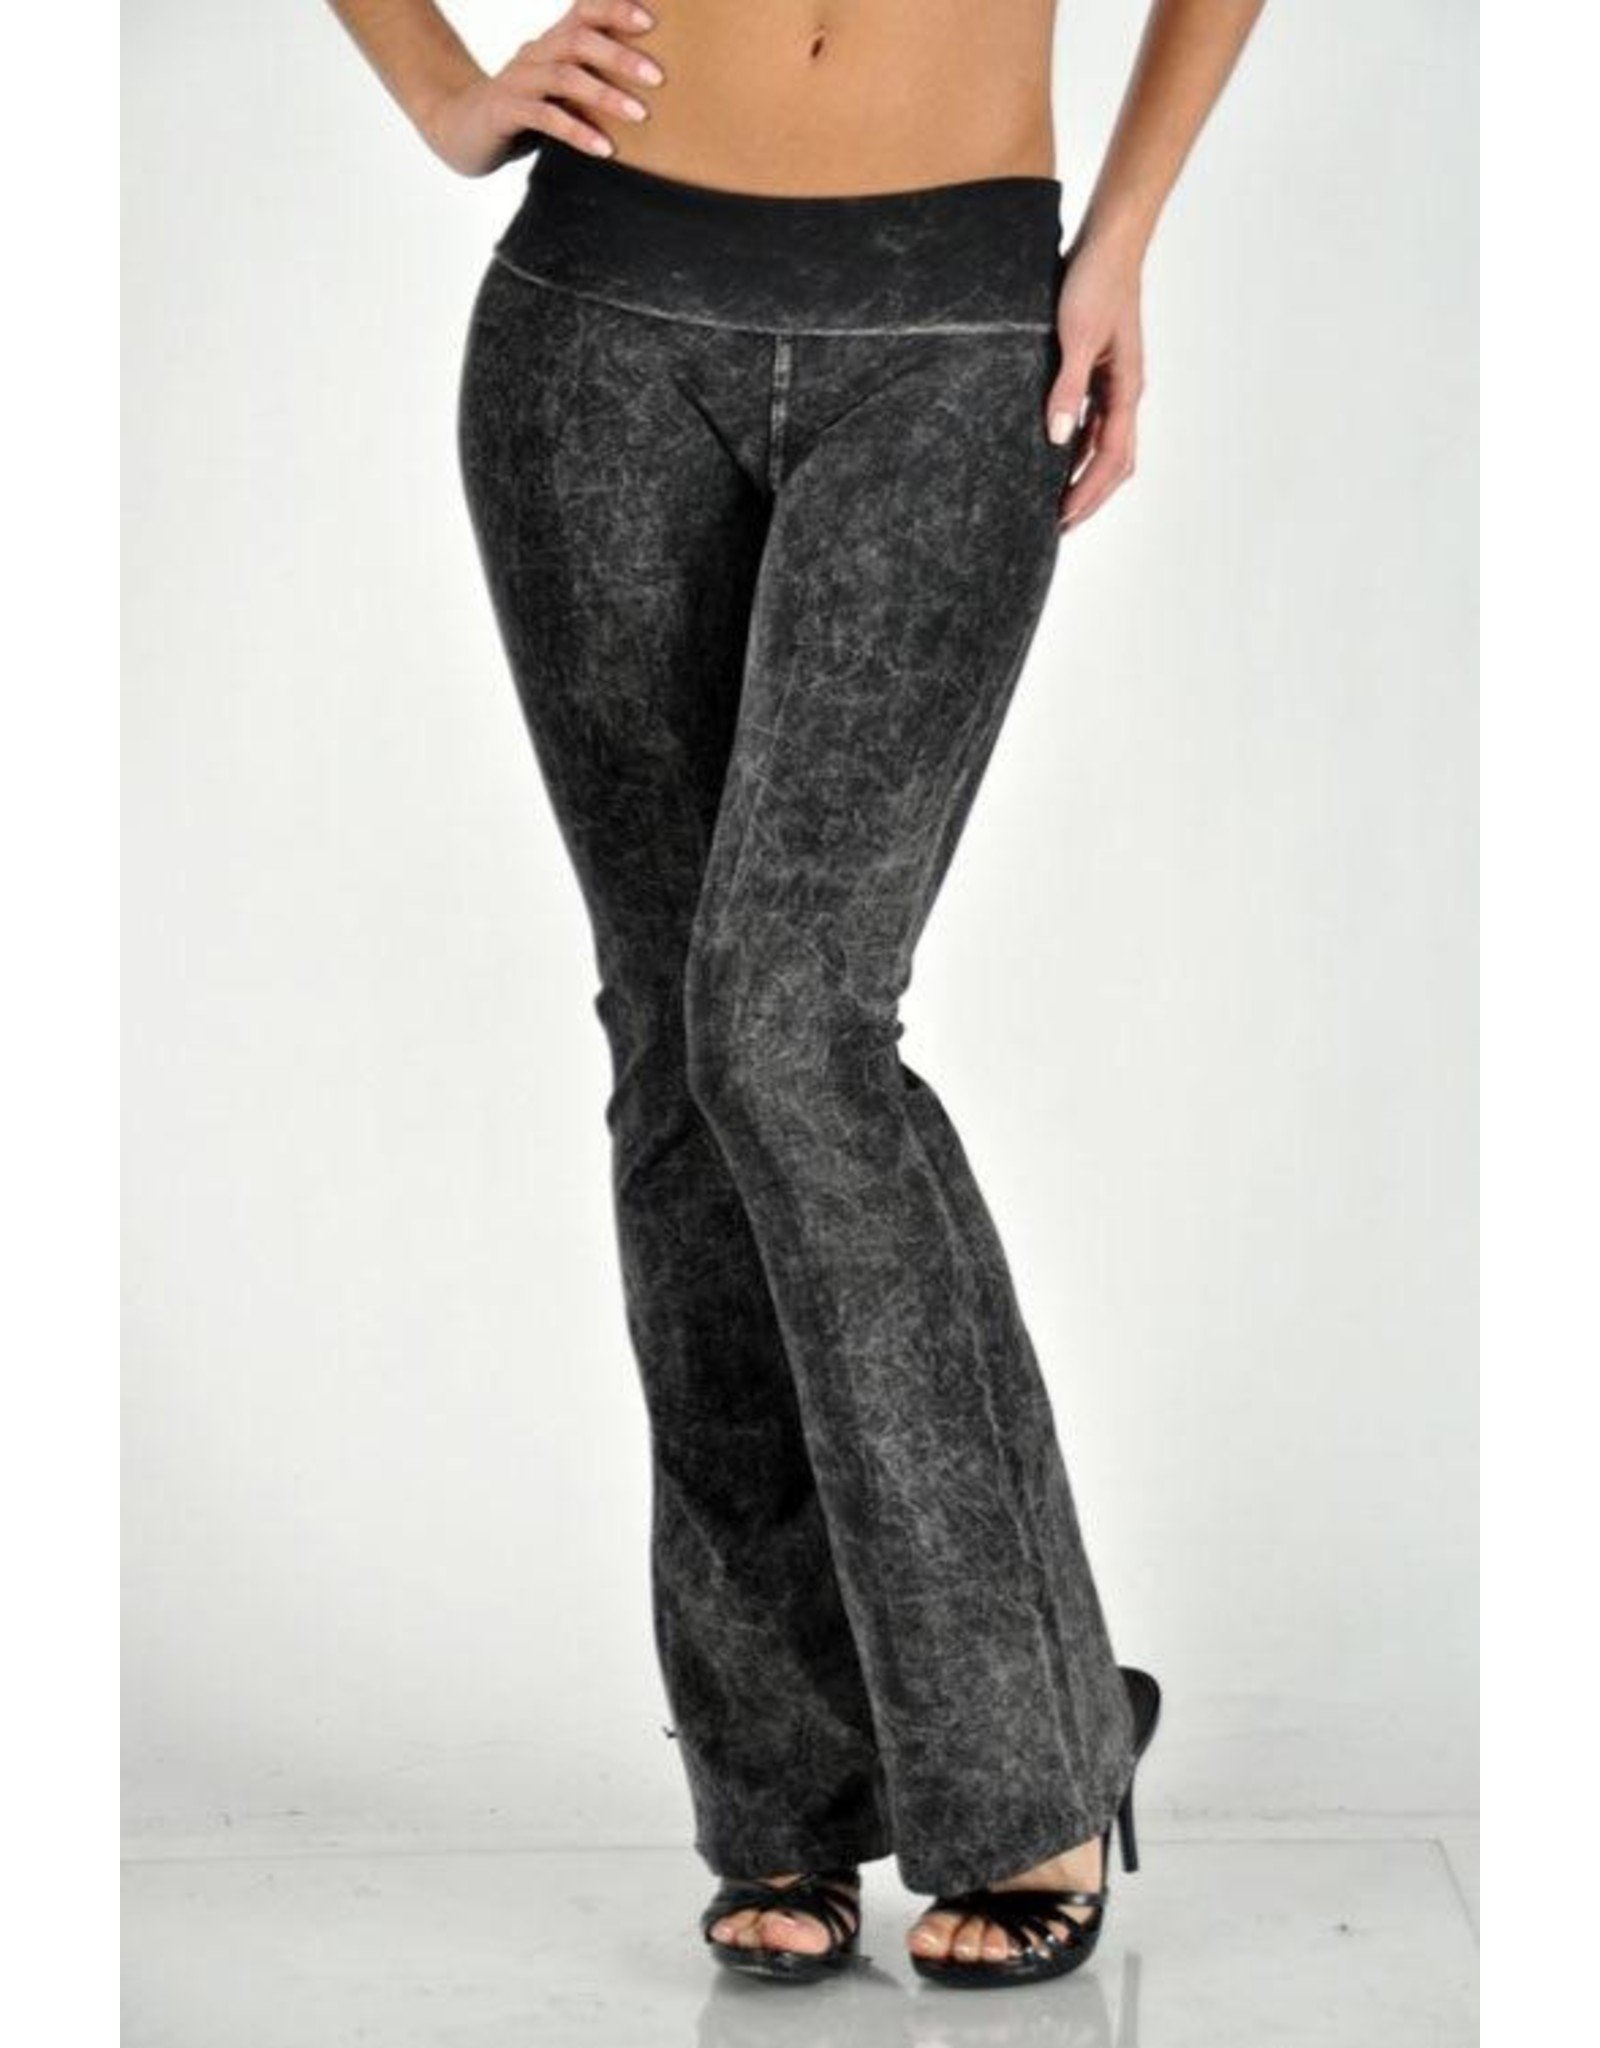 Mineral Wash Yoga Pant with Bell